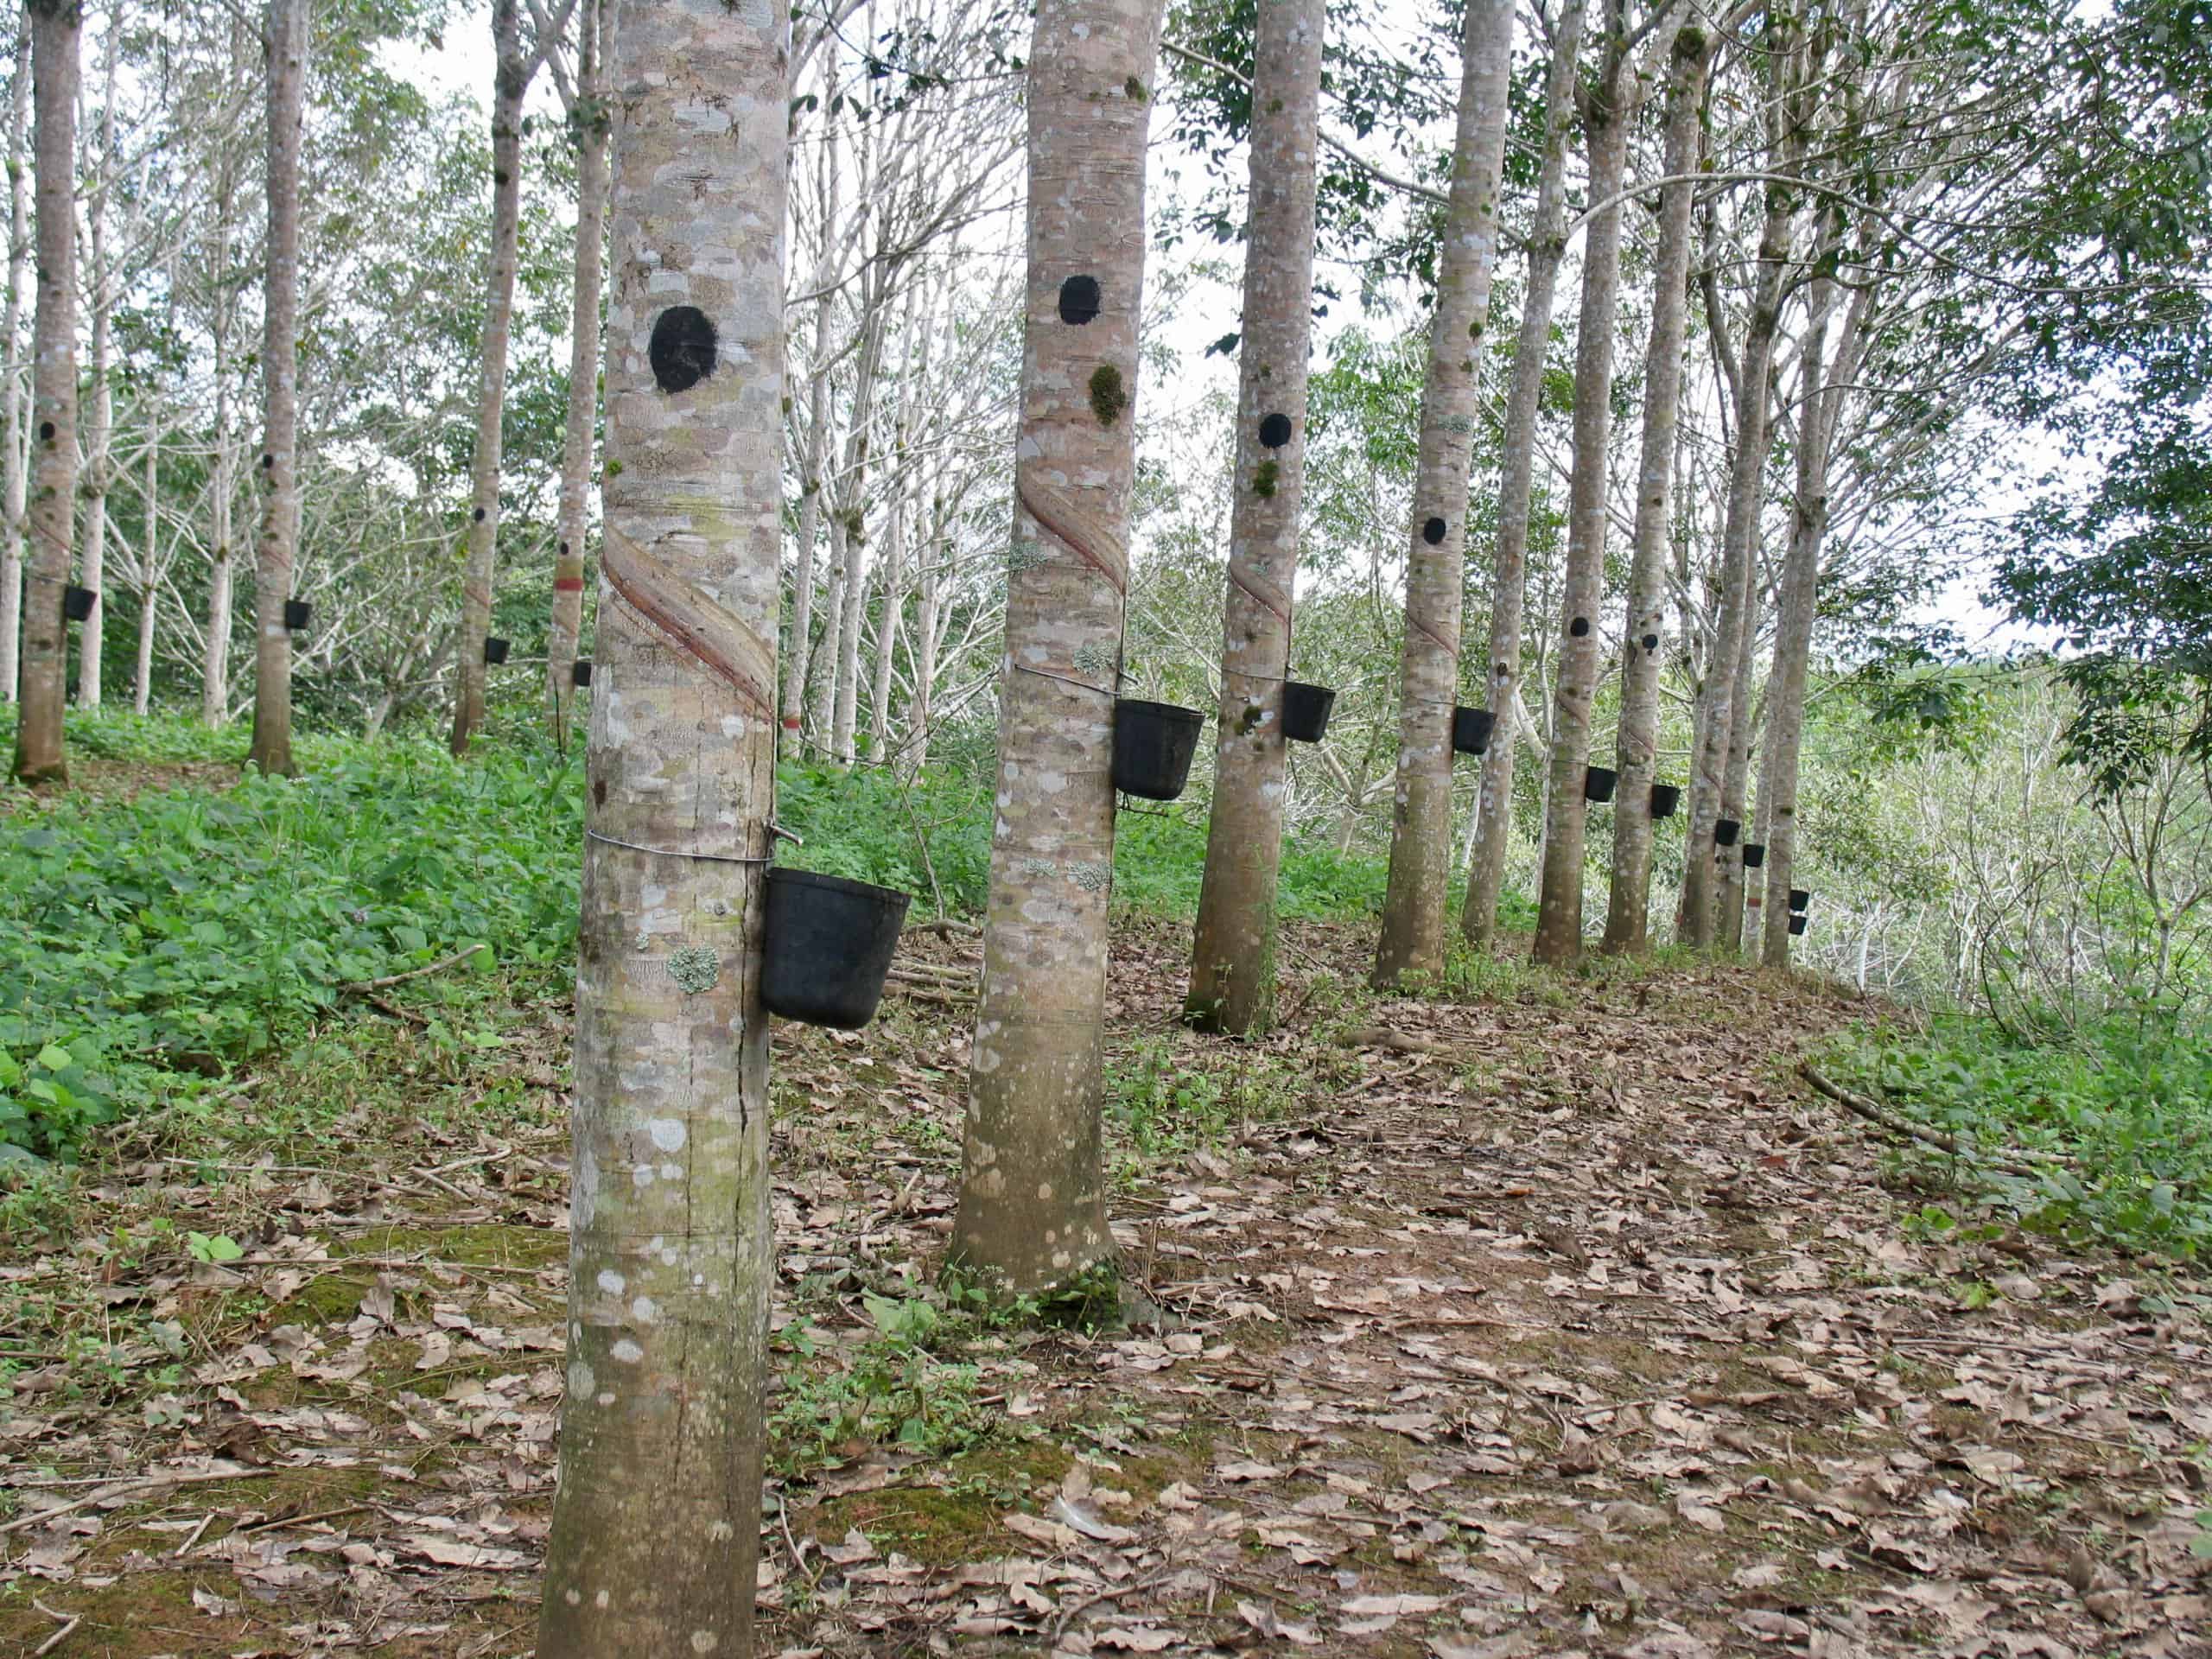 Cultivating Rubber Trees for Natural Latex - Tree Plantation